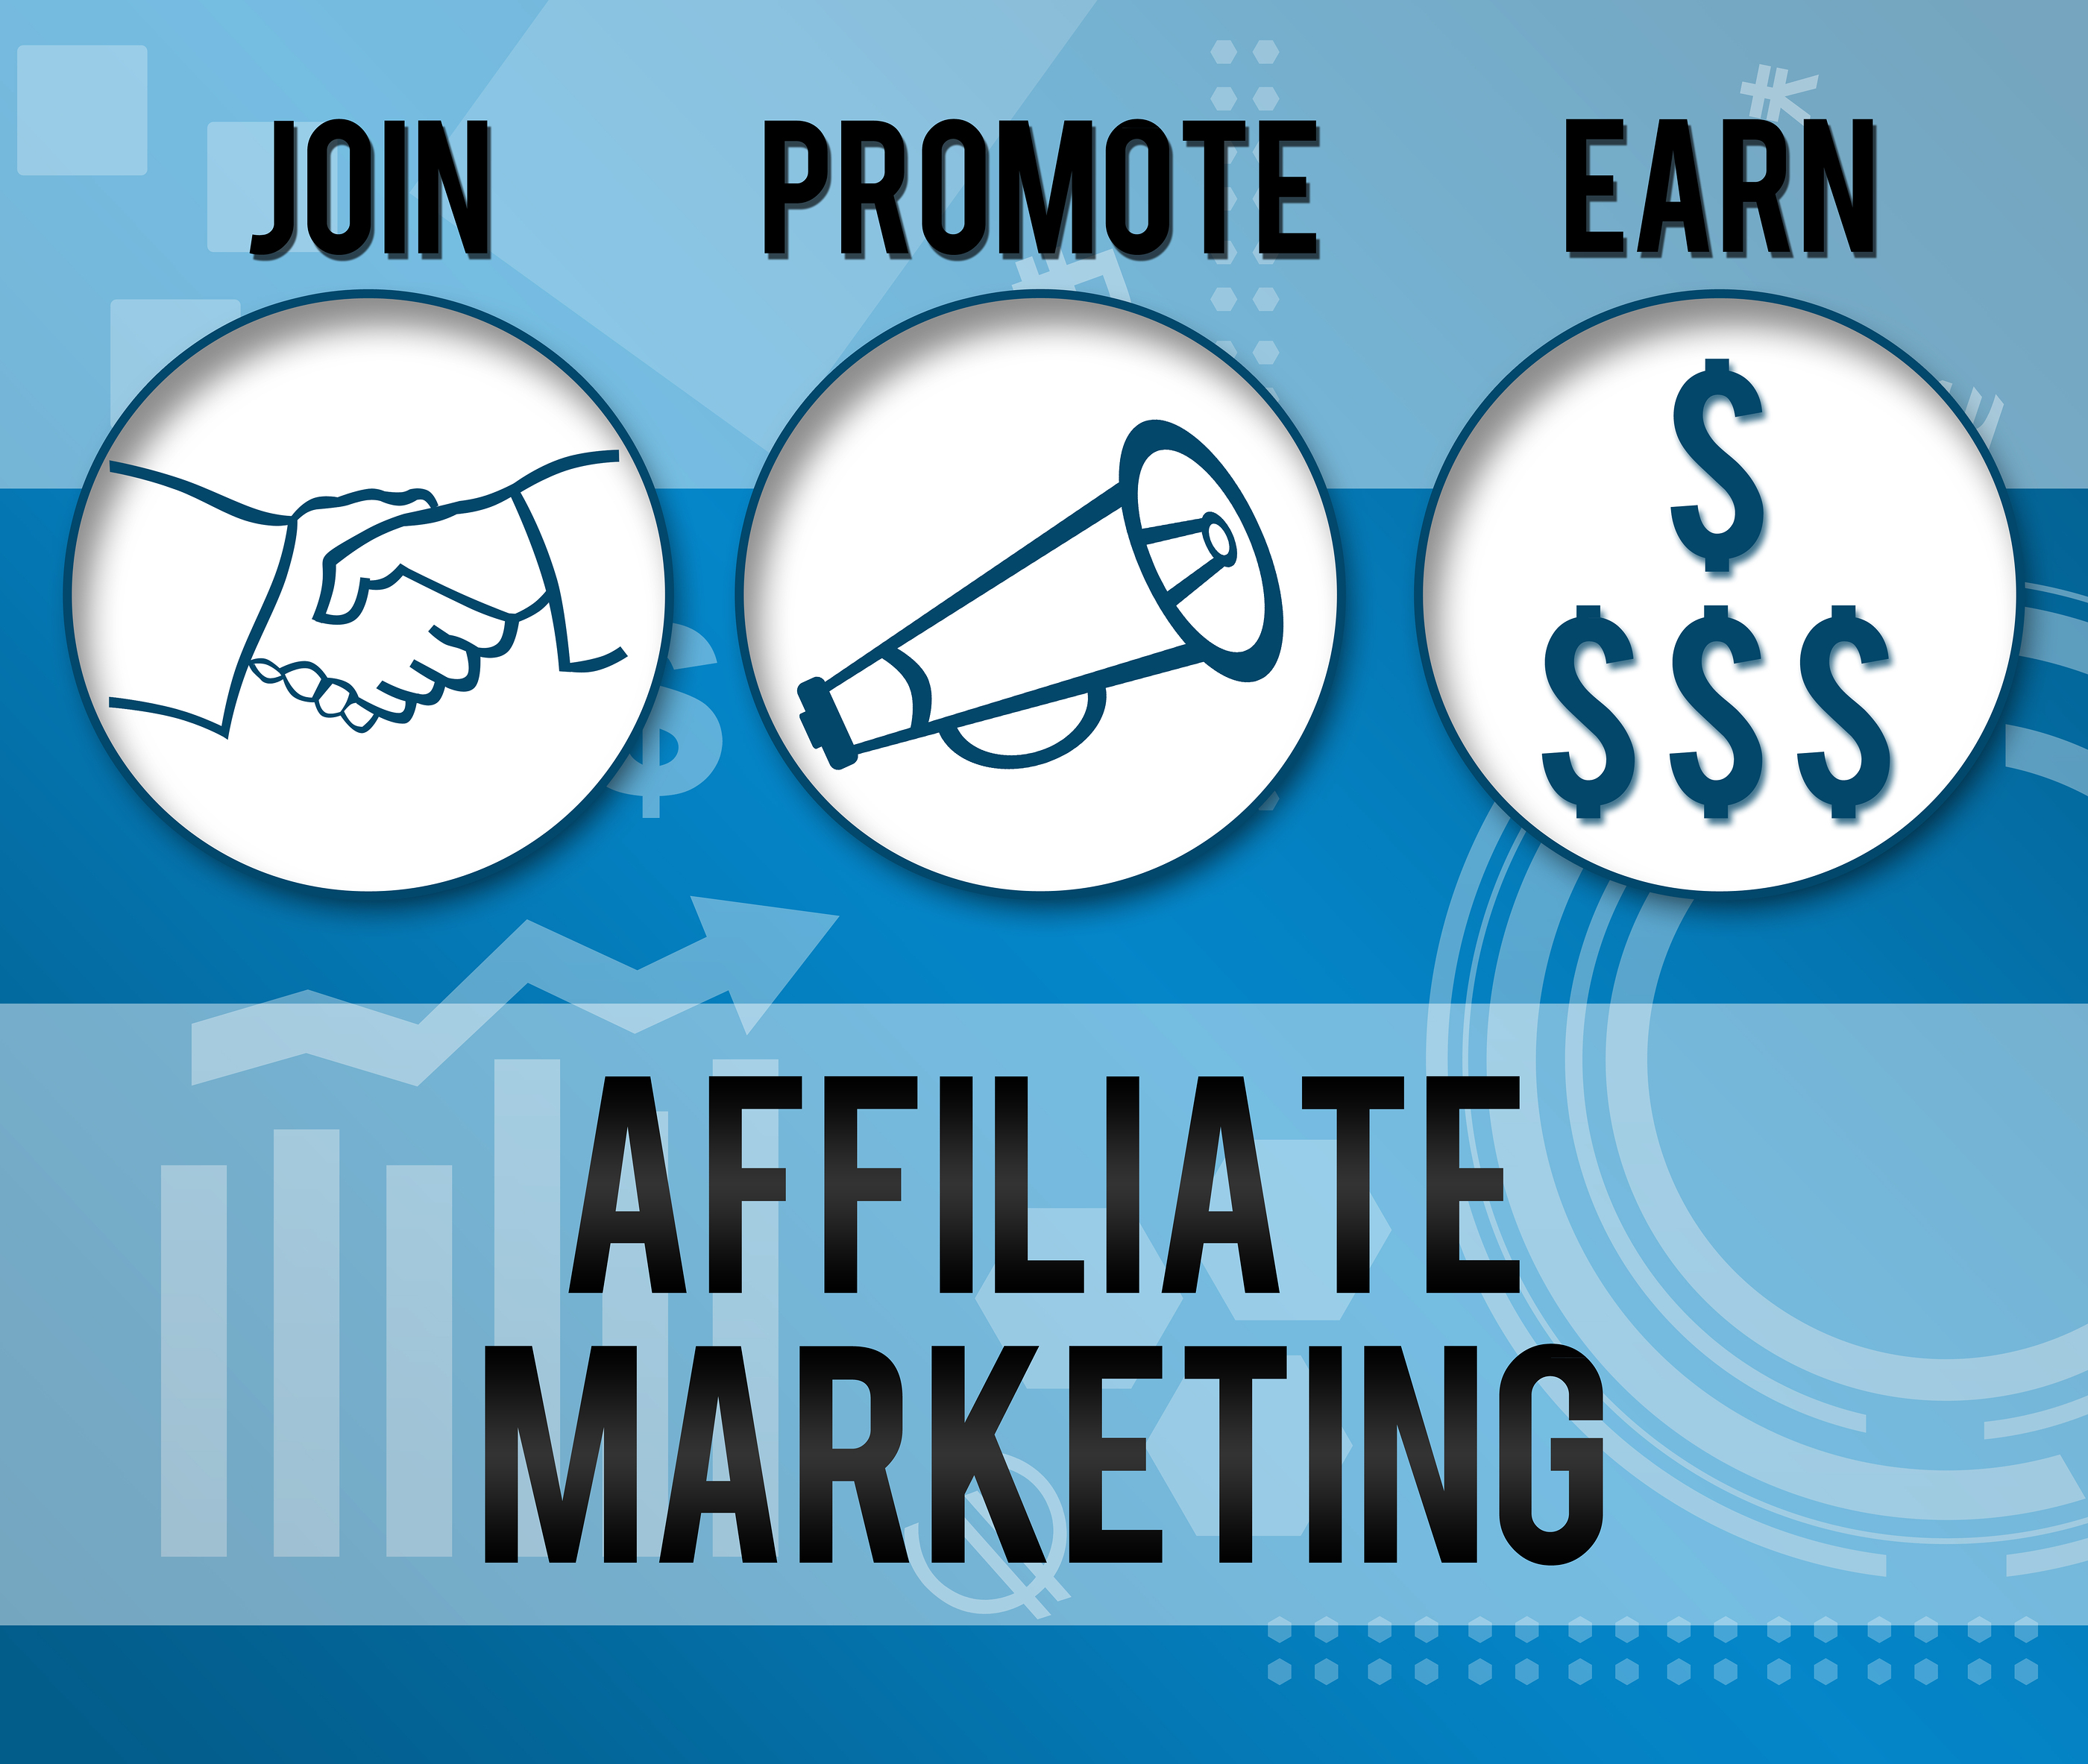 15 Best Affiliate Program Those Pay The Highest Amount